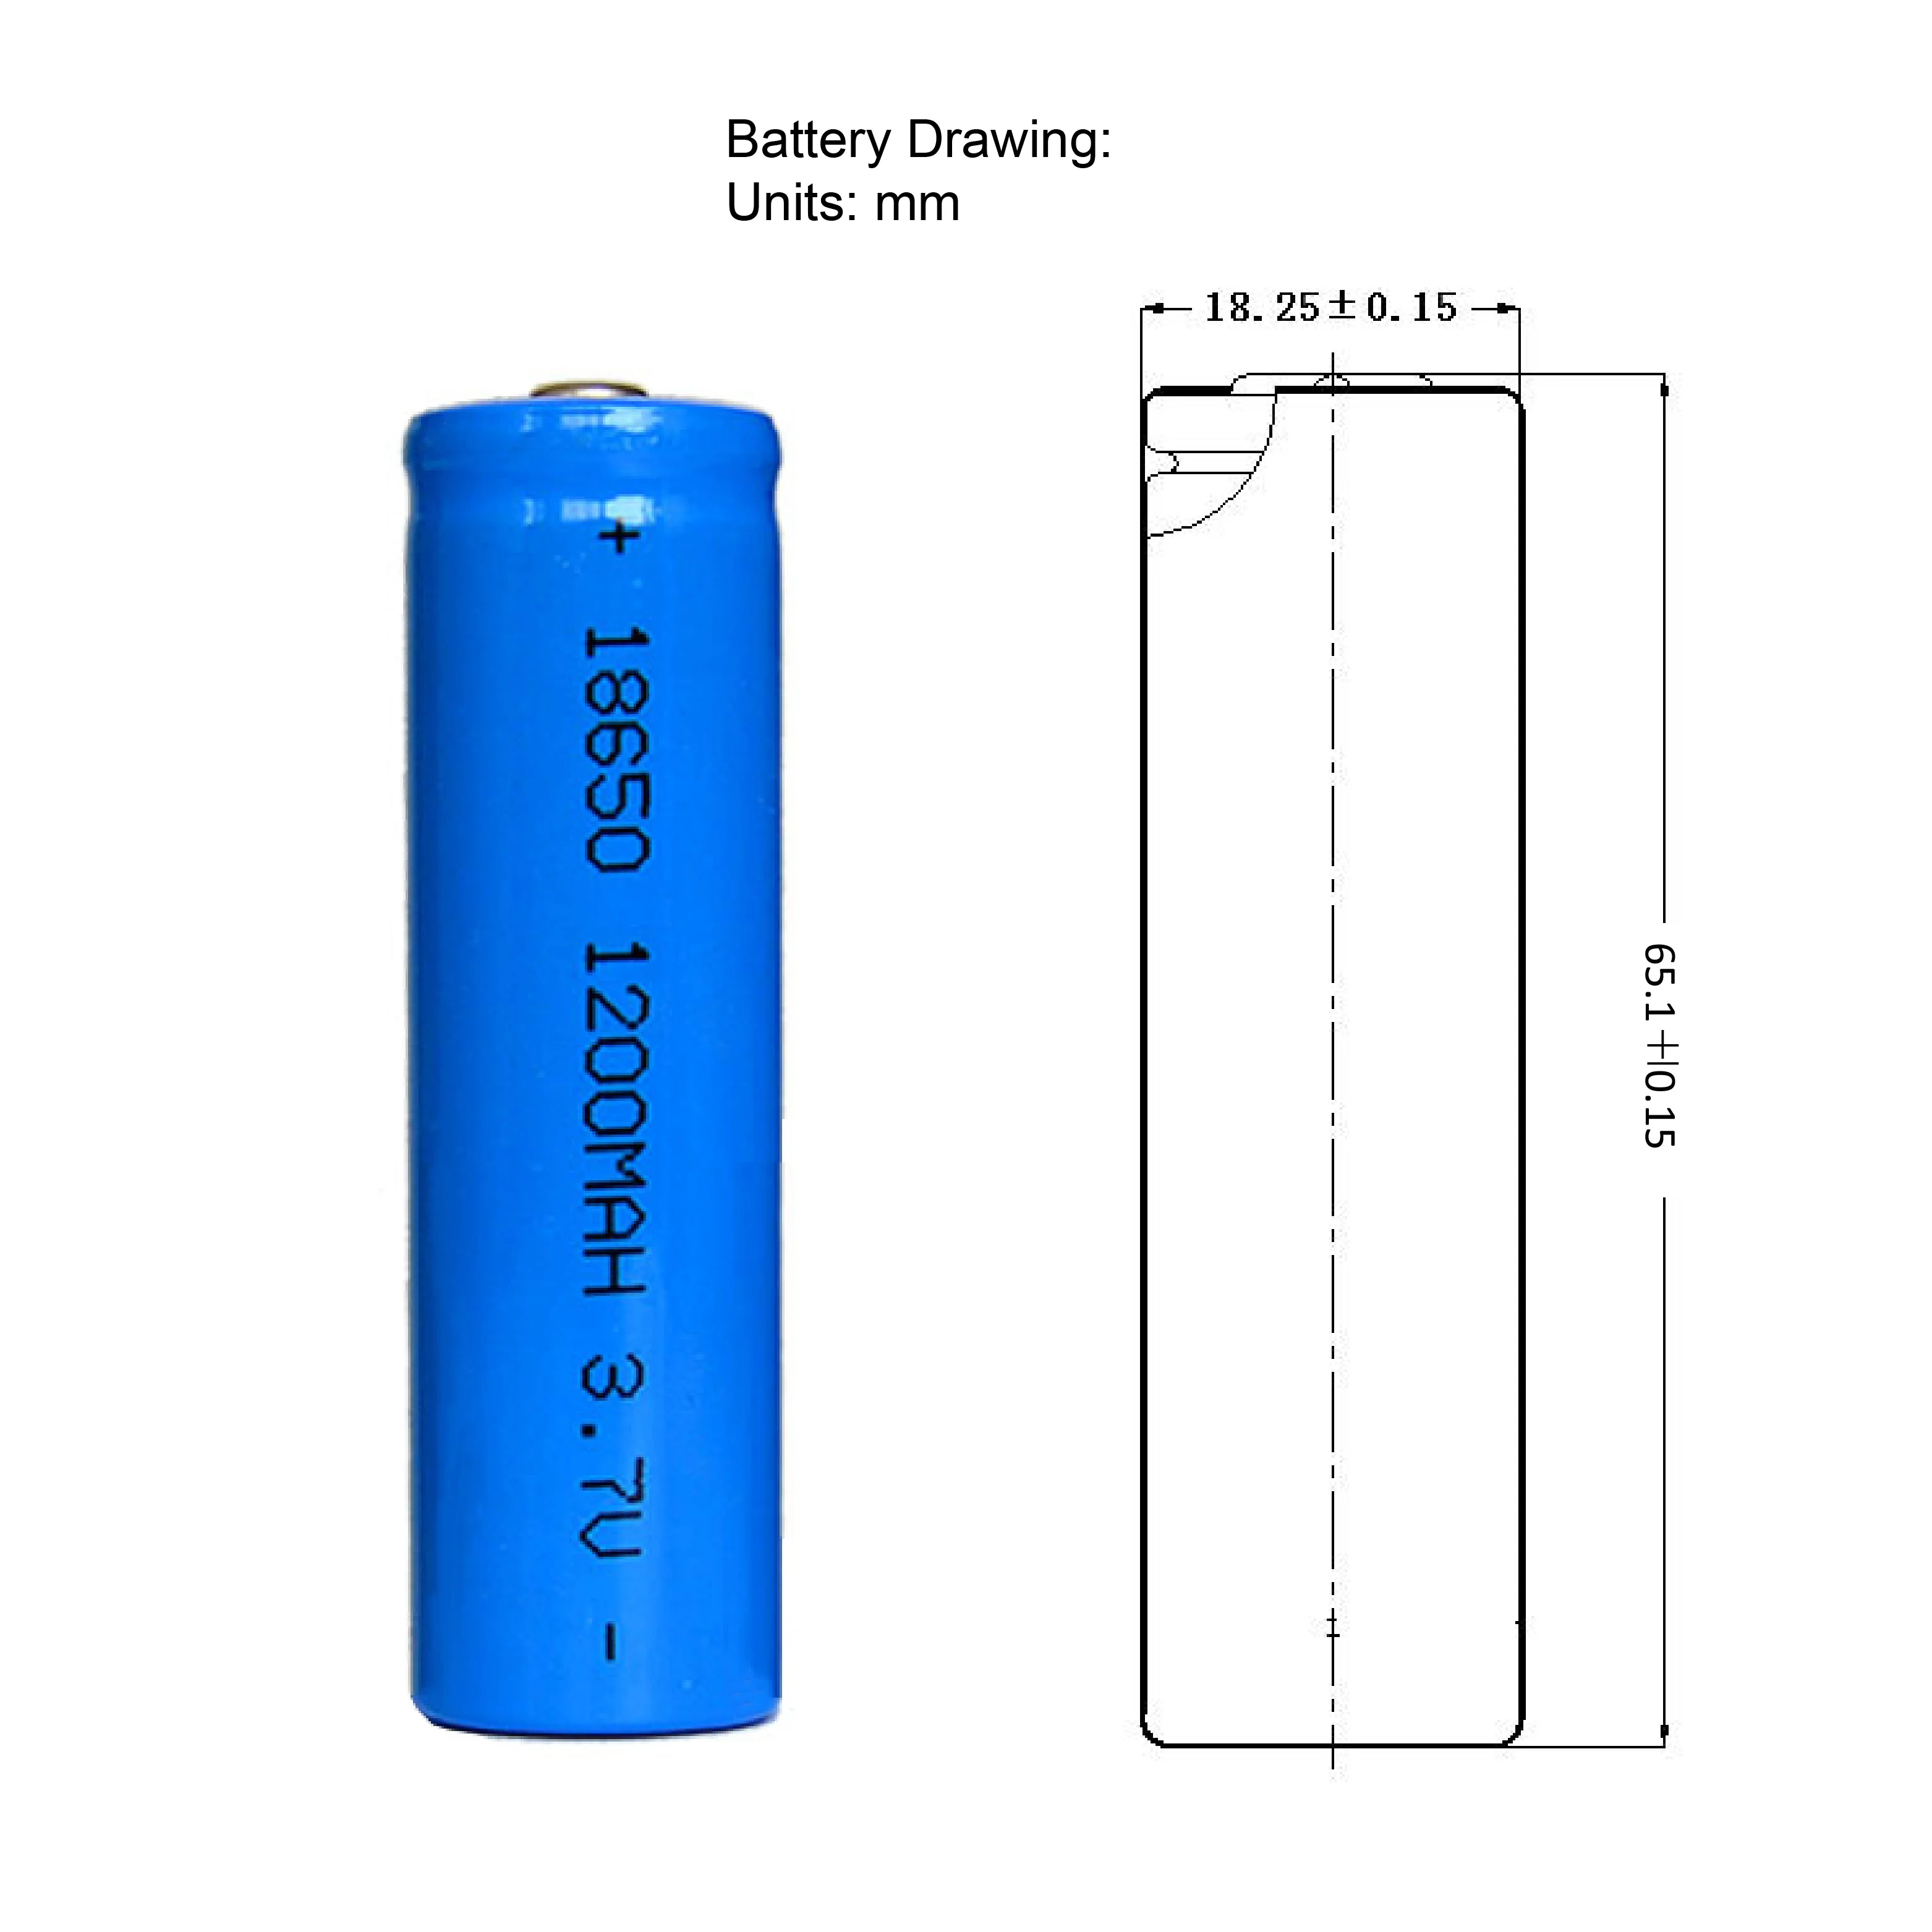 High Performance China Supplier Lithium Ion 18650 Battery Icr18650 2200mah 2600mah - Buy Battery 18650,Lithium Ion 18650 Battery Product on Alibaba.com